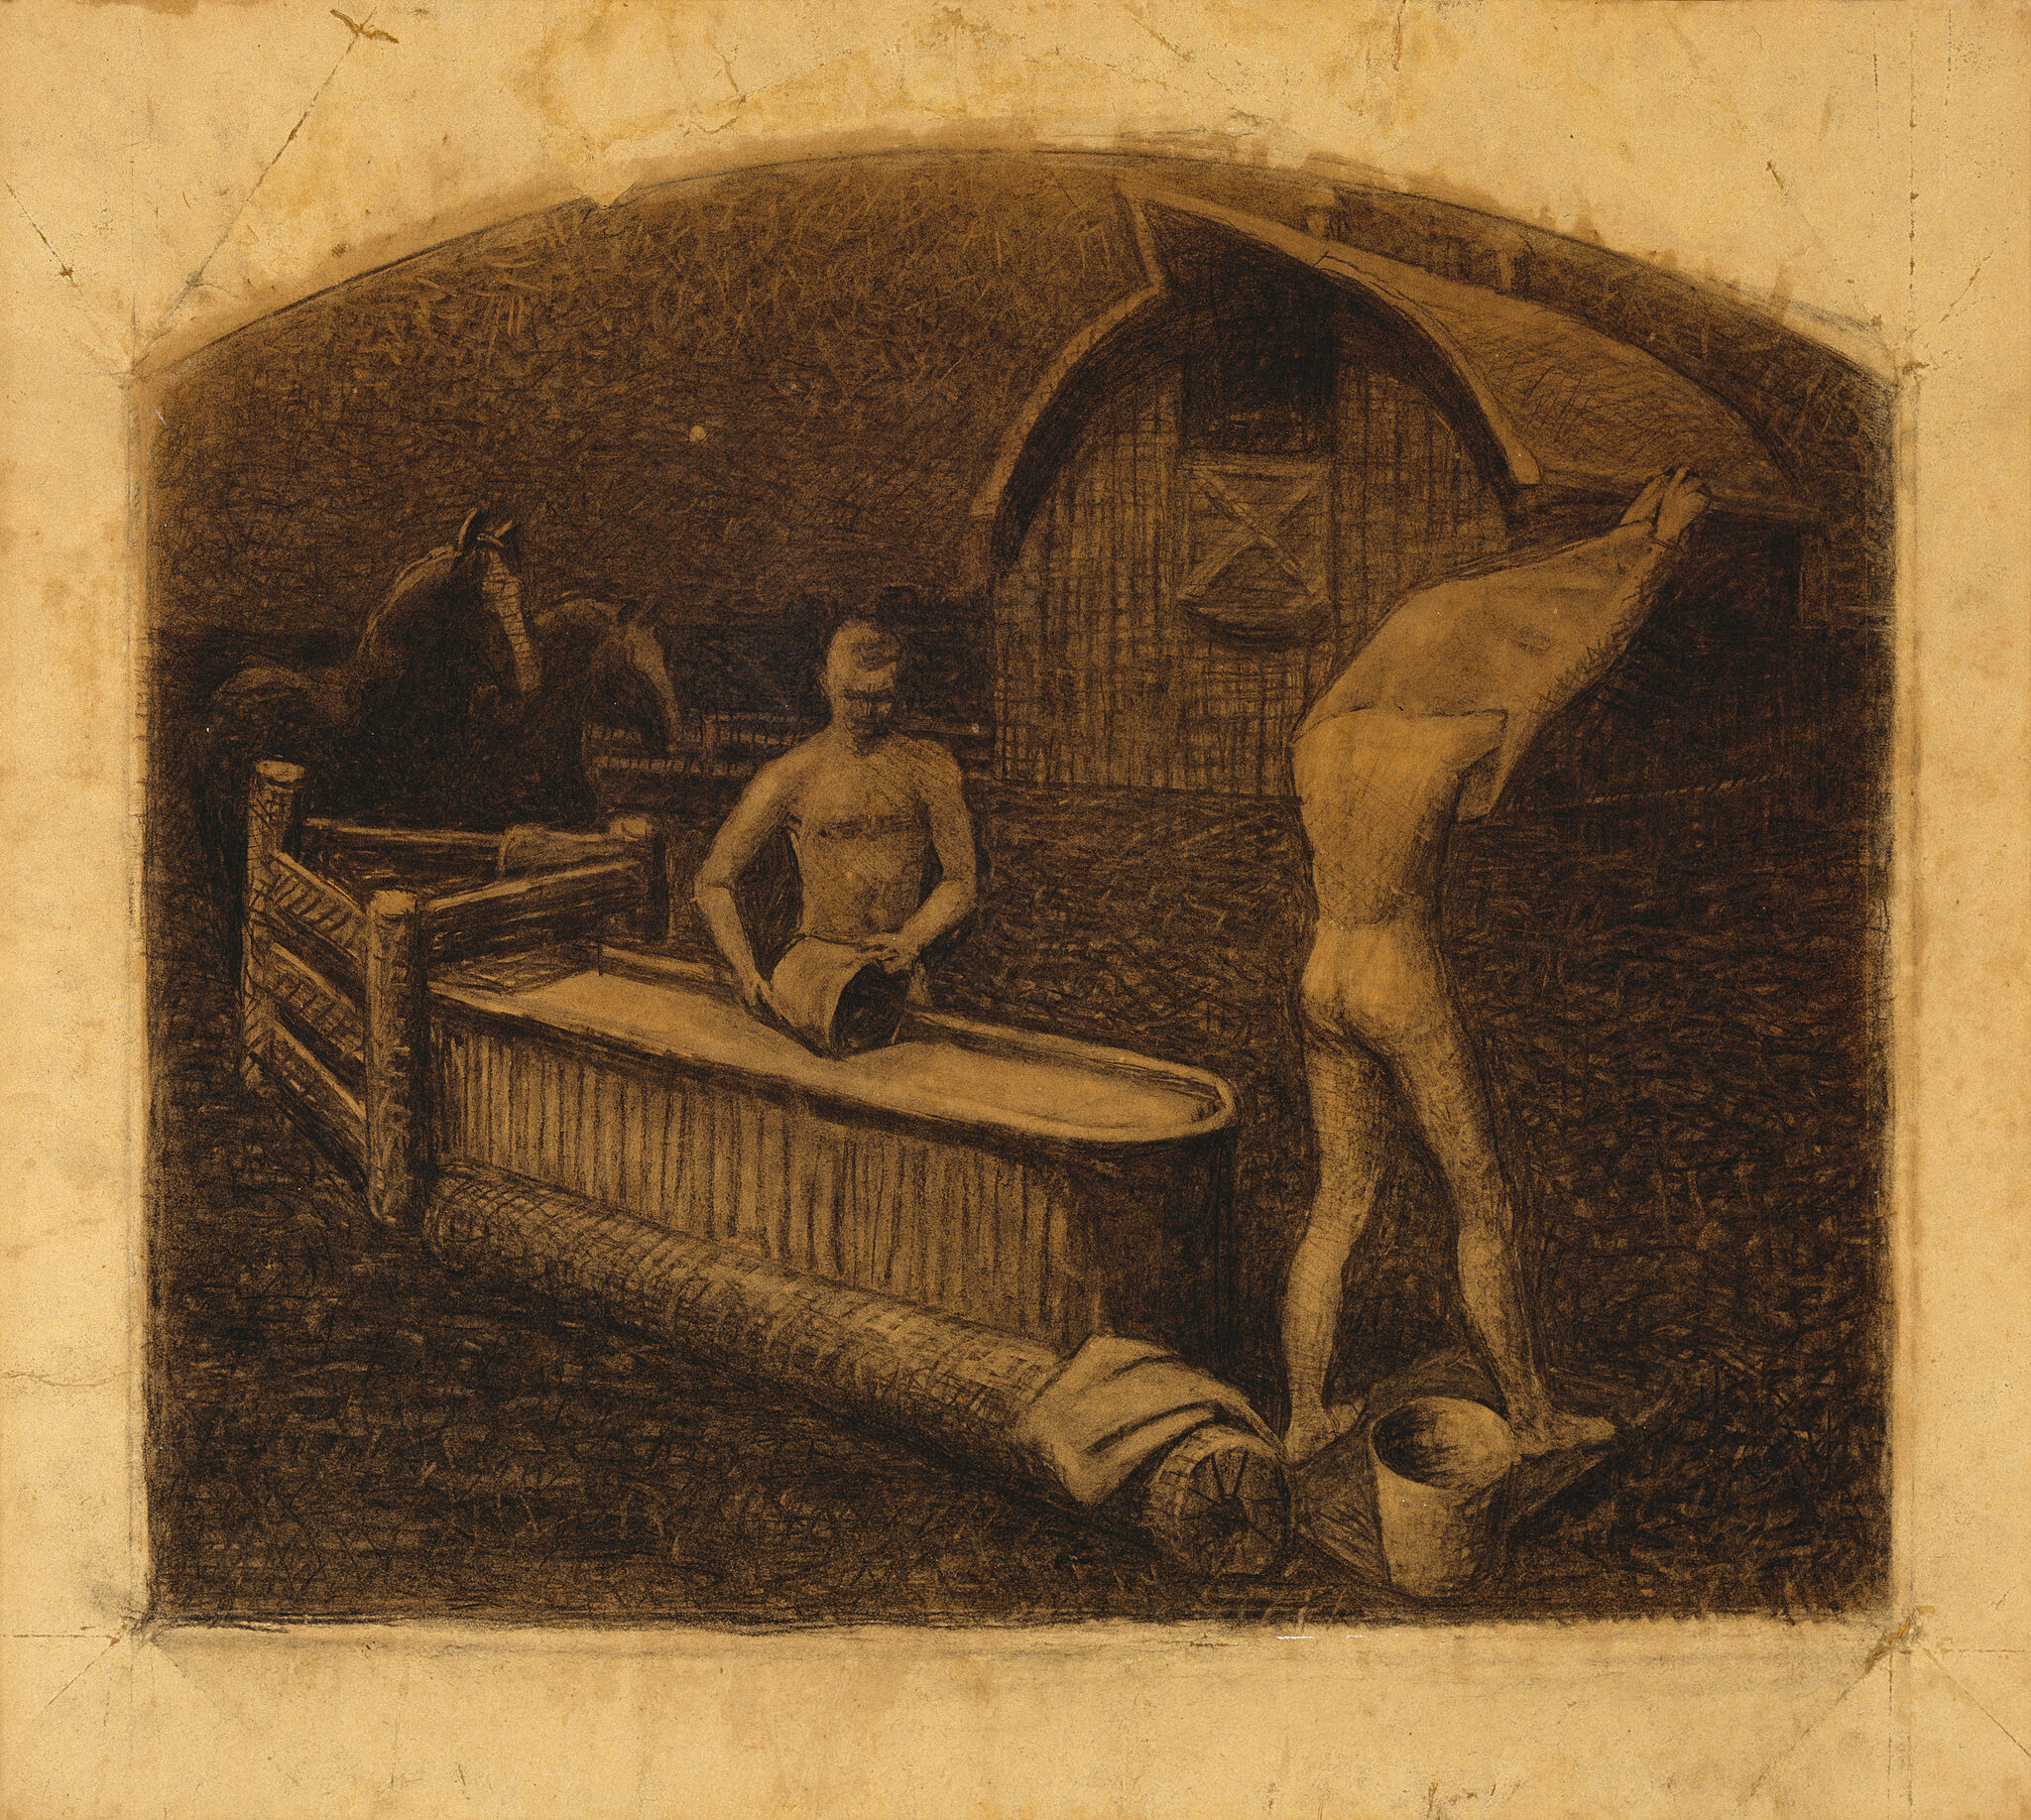 Charcoal drawing of two men preparing to bathe outdoors.